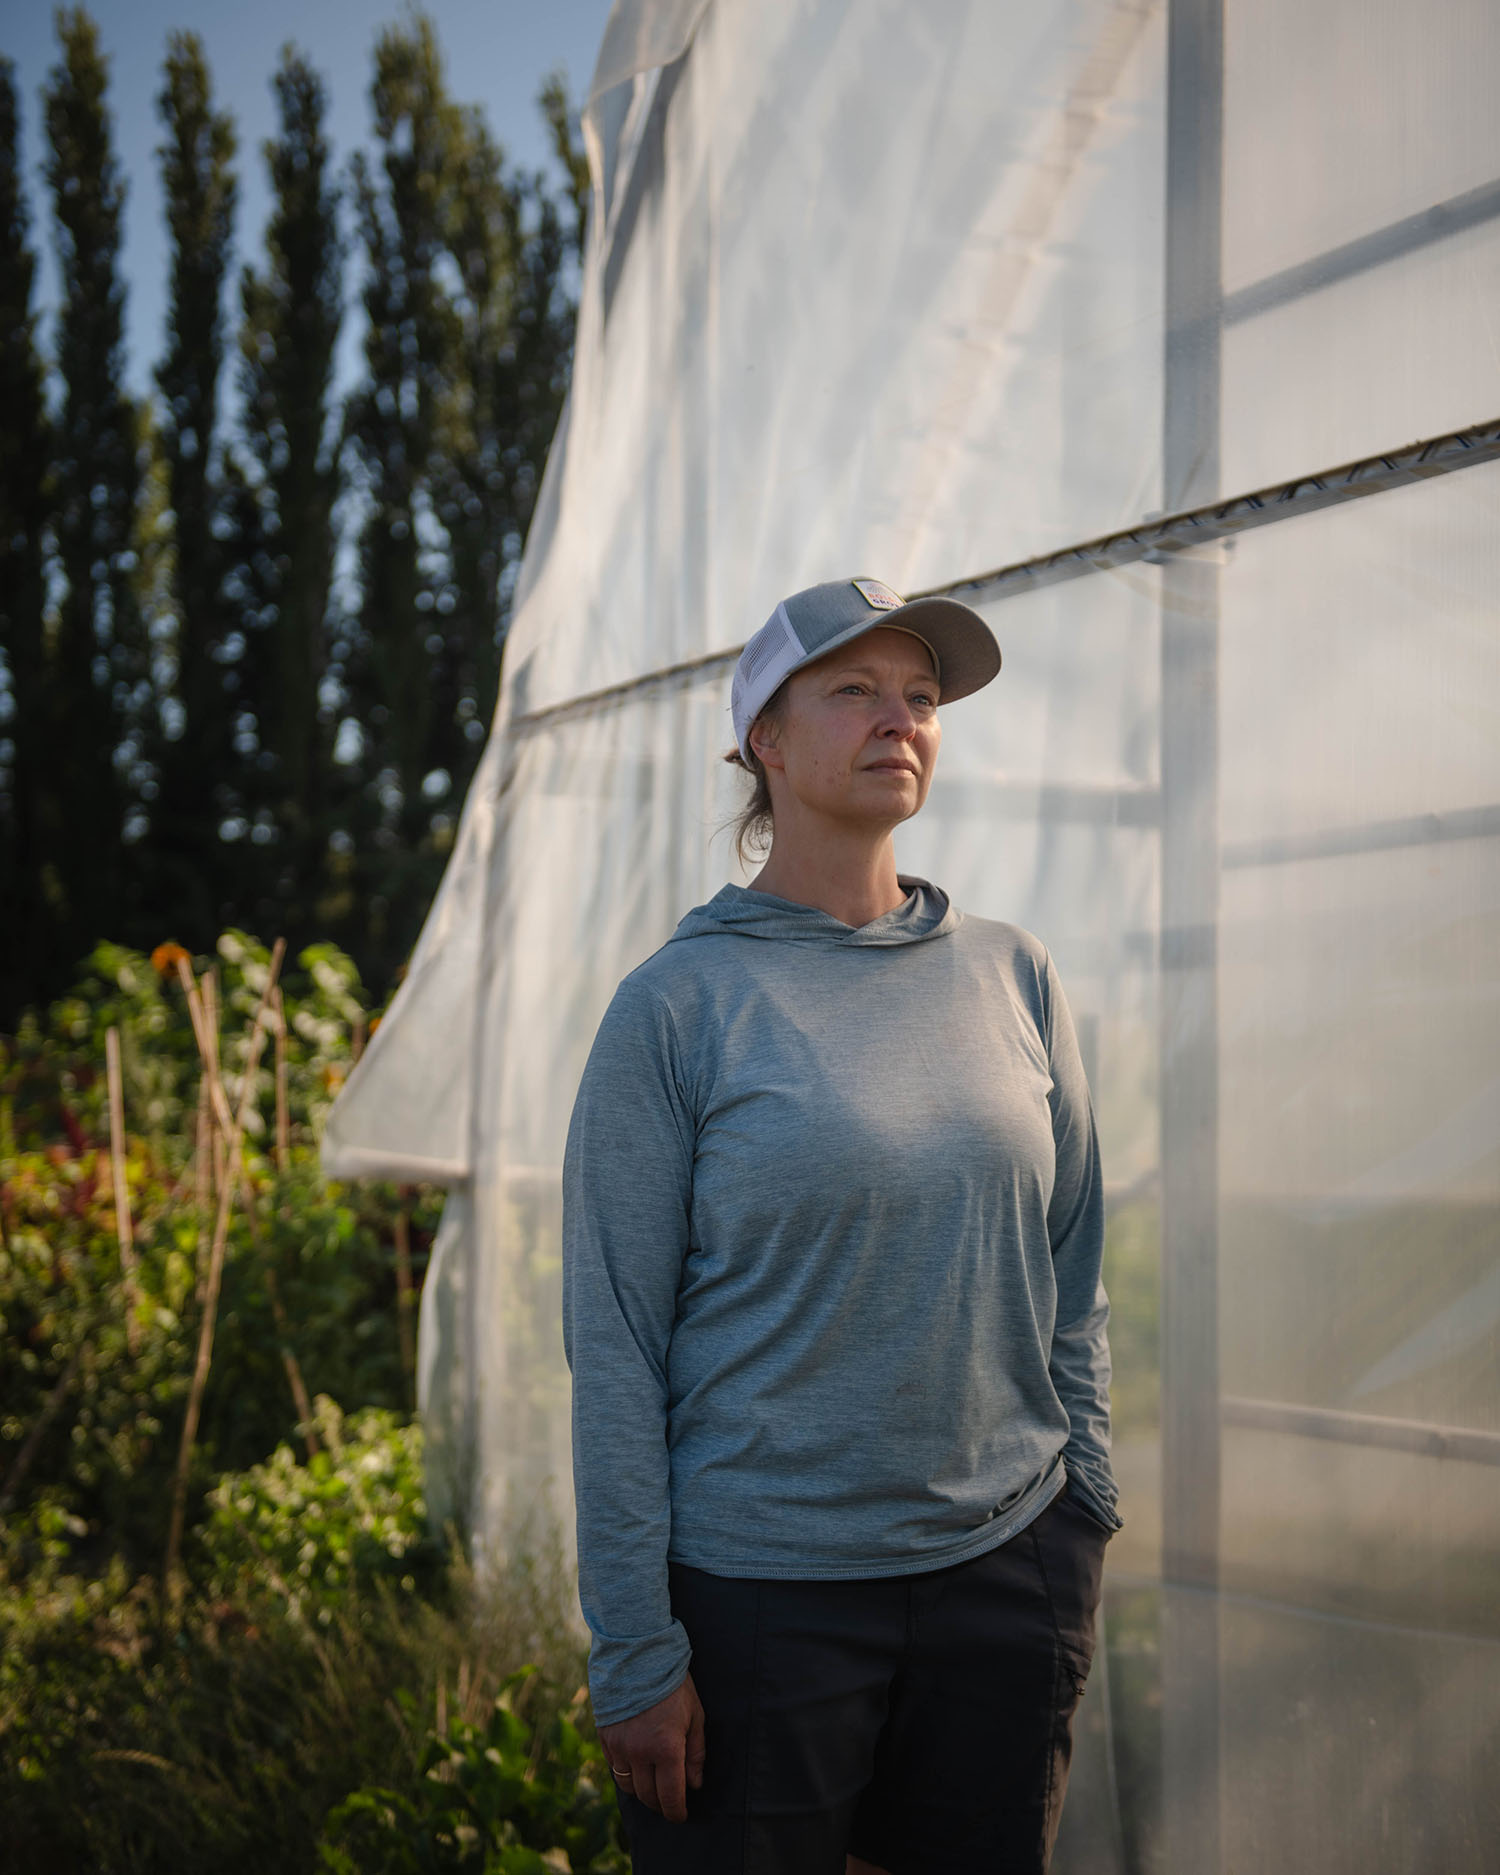 Amy Frye poses for a portrait on her farm in Bow, Washington.